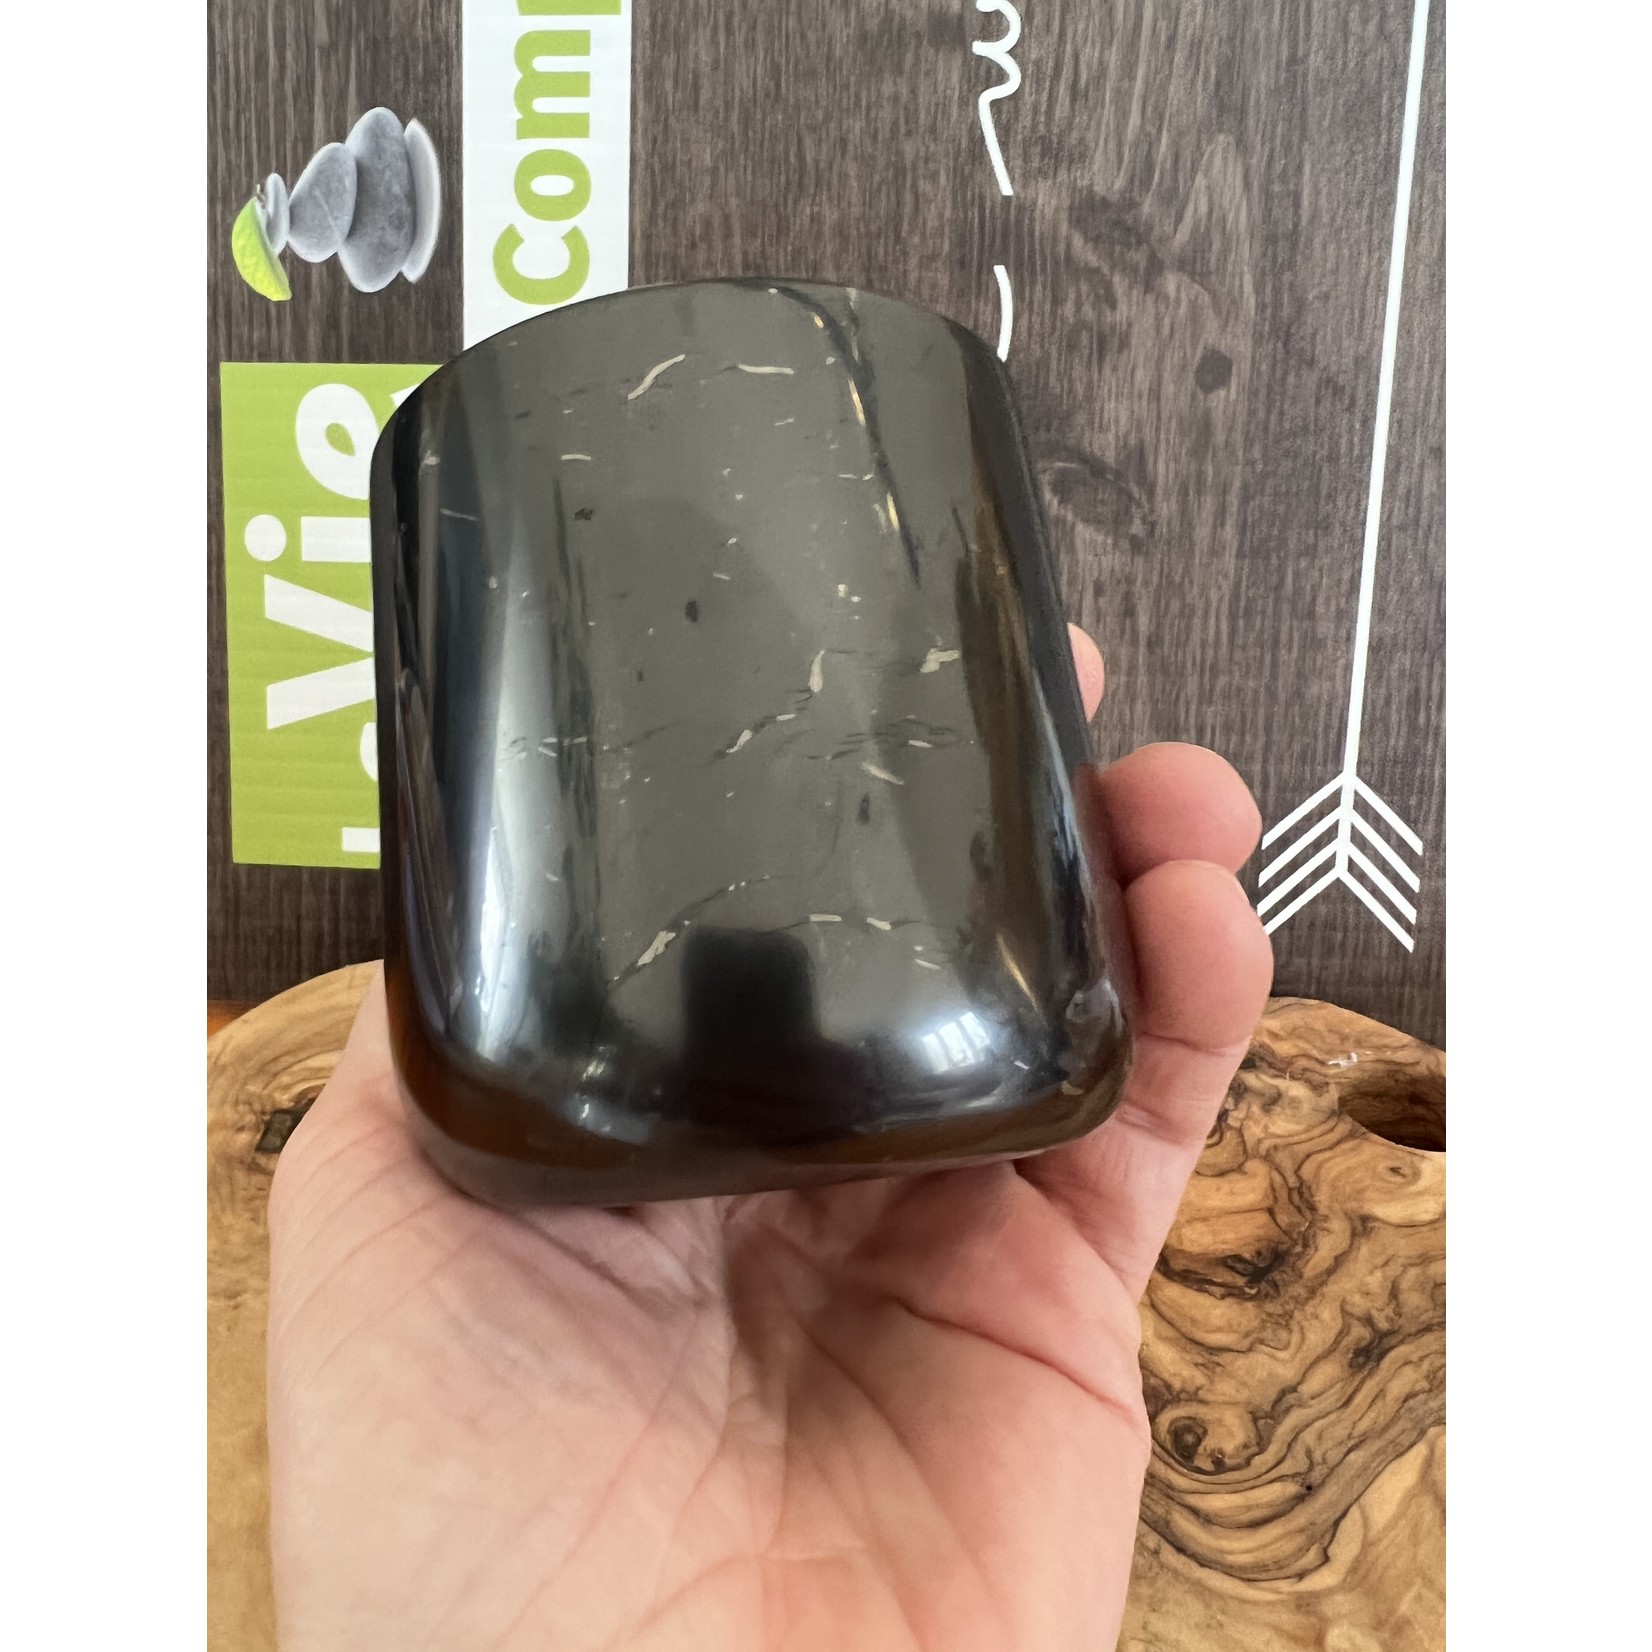 unique shungite glass handcrafted from solid shungite stone, drink a sip of shungite water